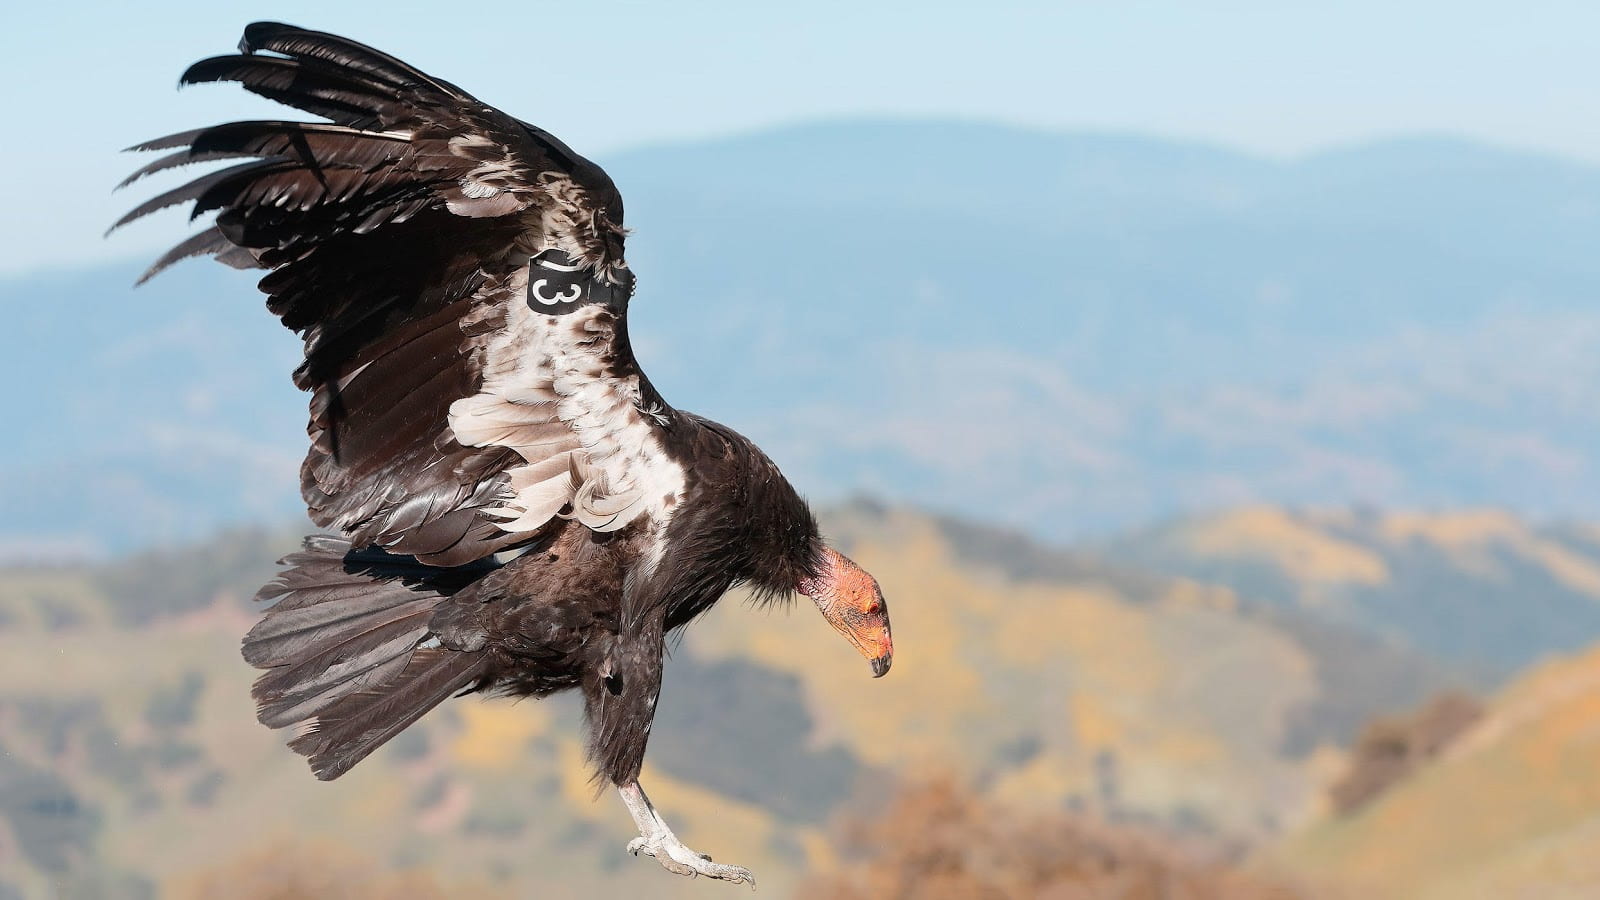 Adult California Condor photographed by Loi Nguyen.